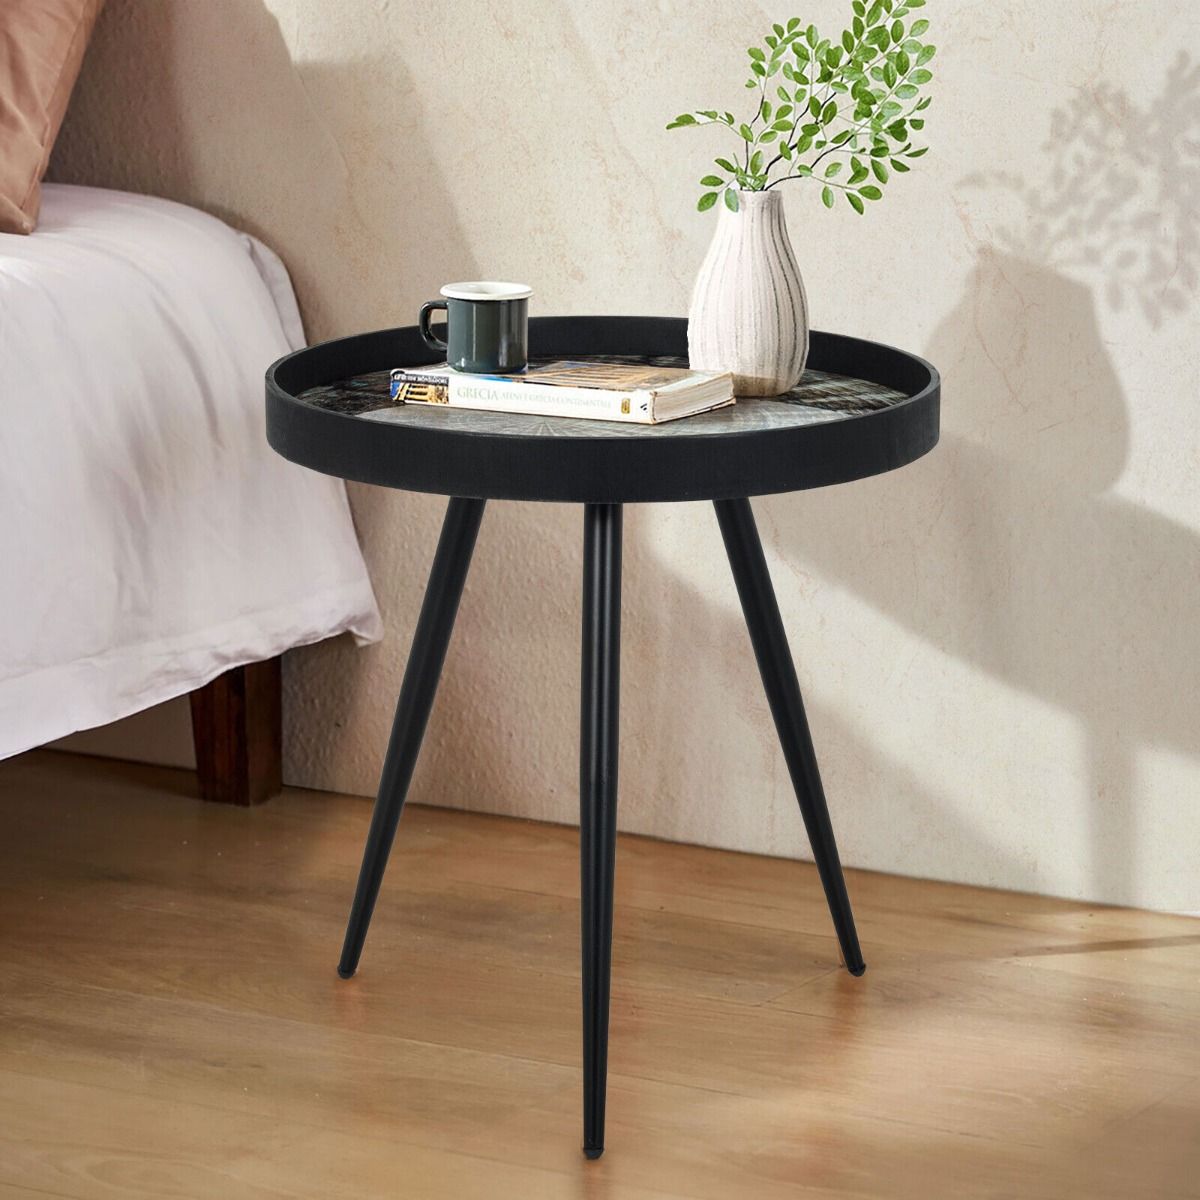 Modern Round Coffee Table with Wooden Tray Top and Steel Legs